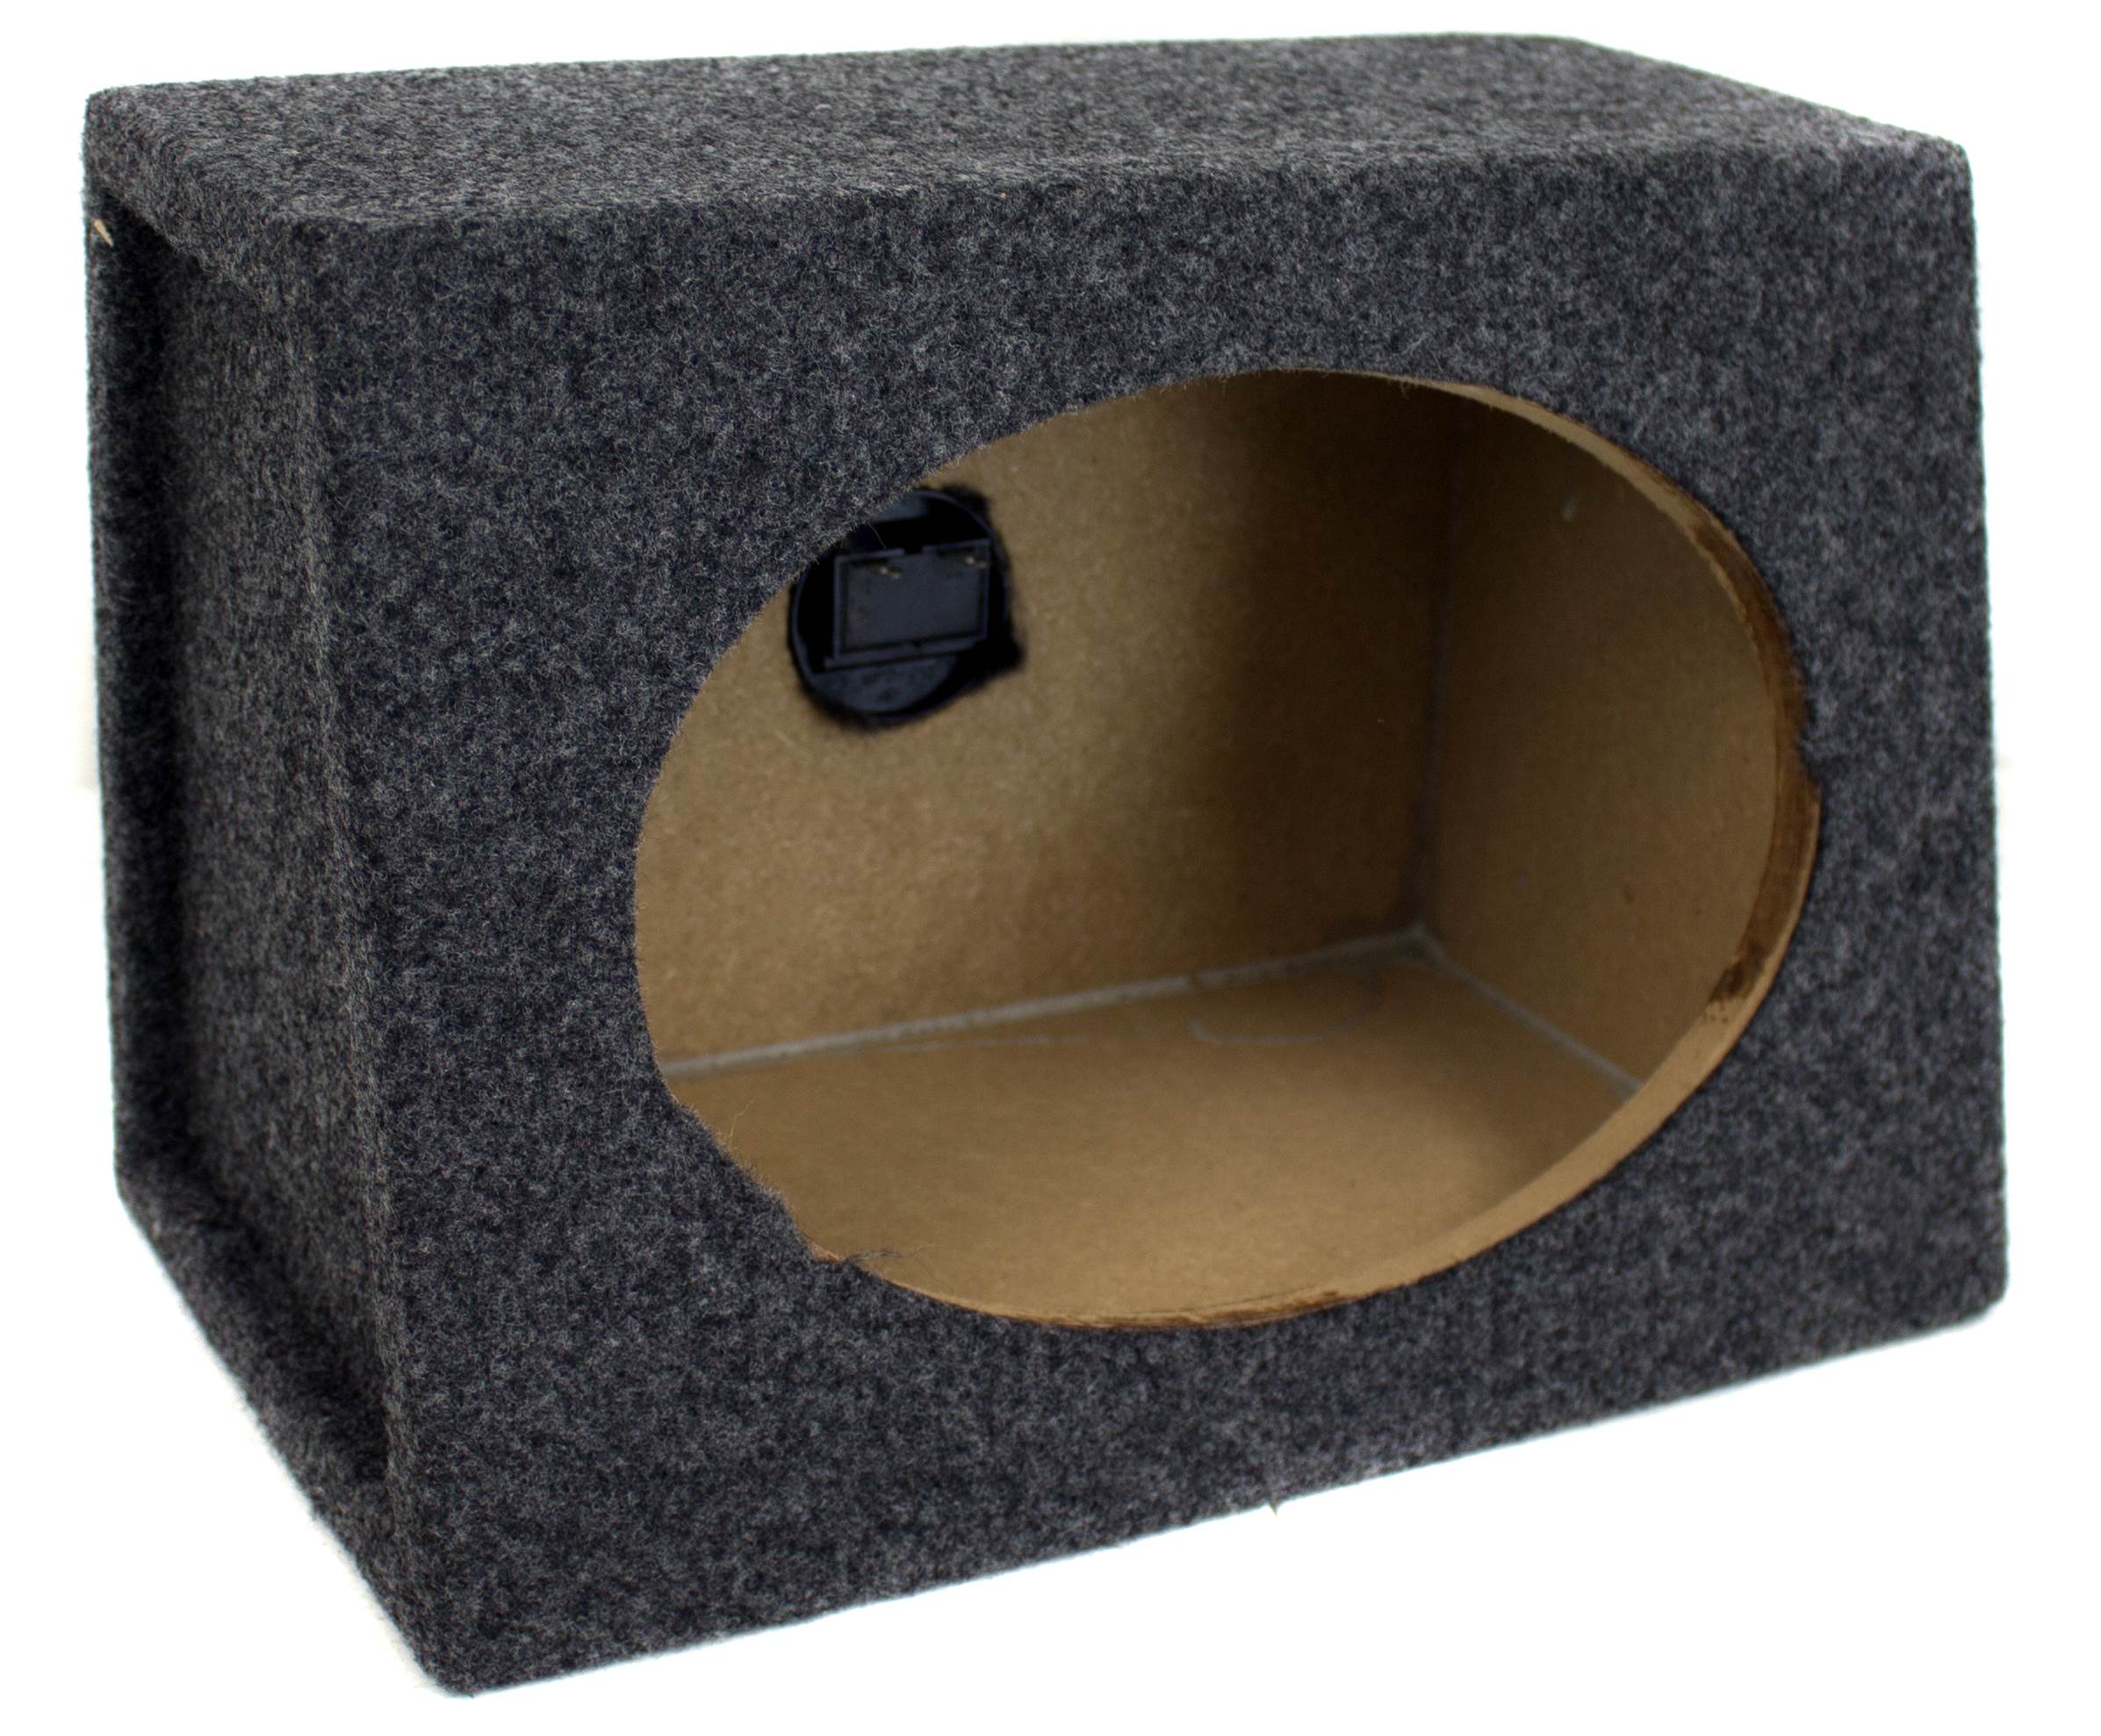 2 Speaker Boxes QPower Angled Style 6 x 9 Inch Car Audio Speaker Box Enclosures 